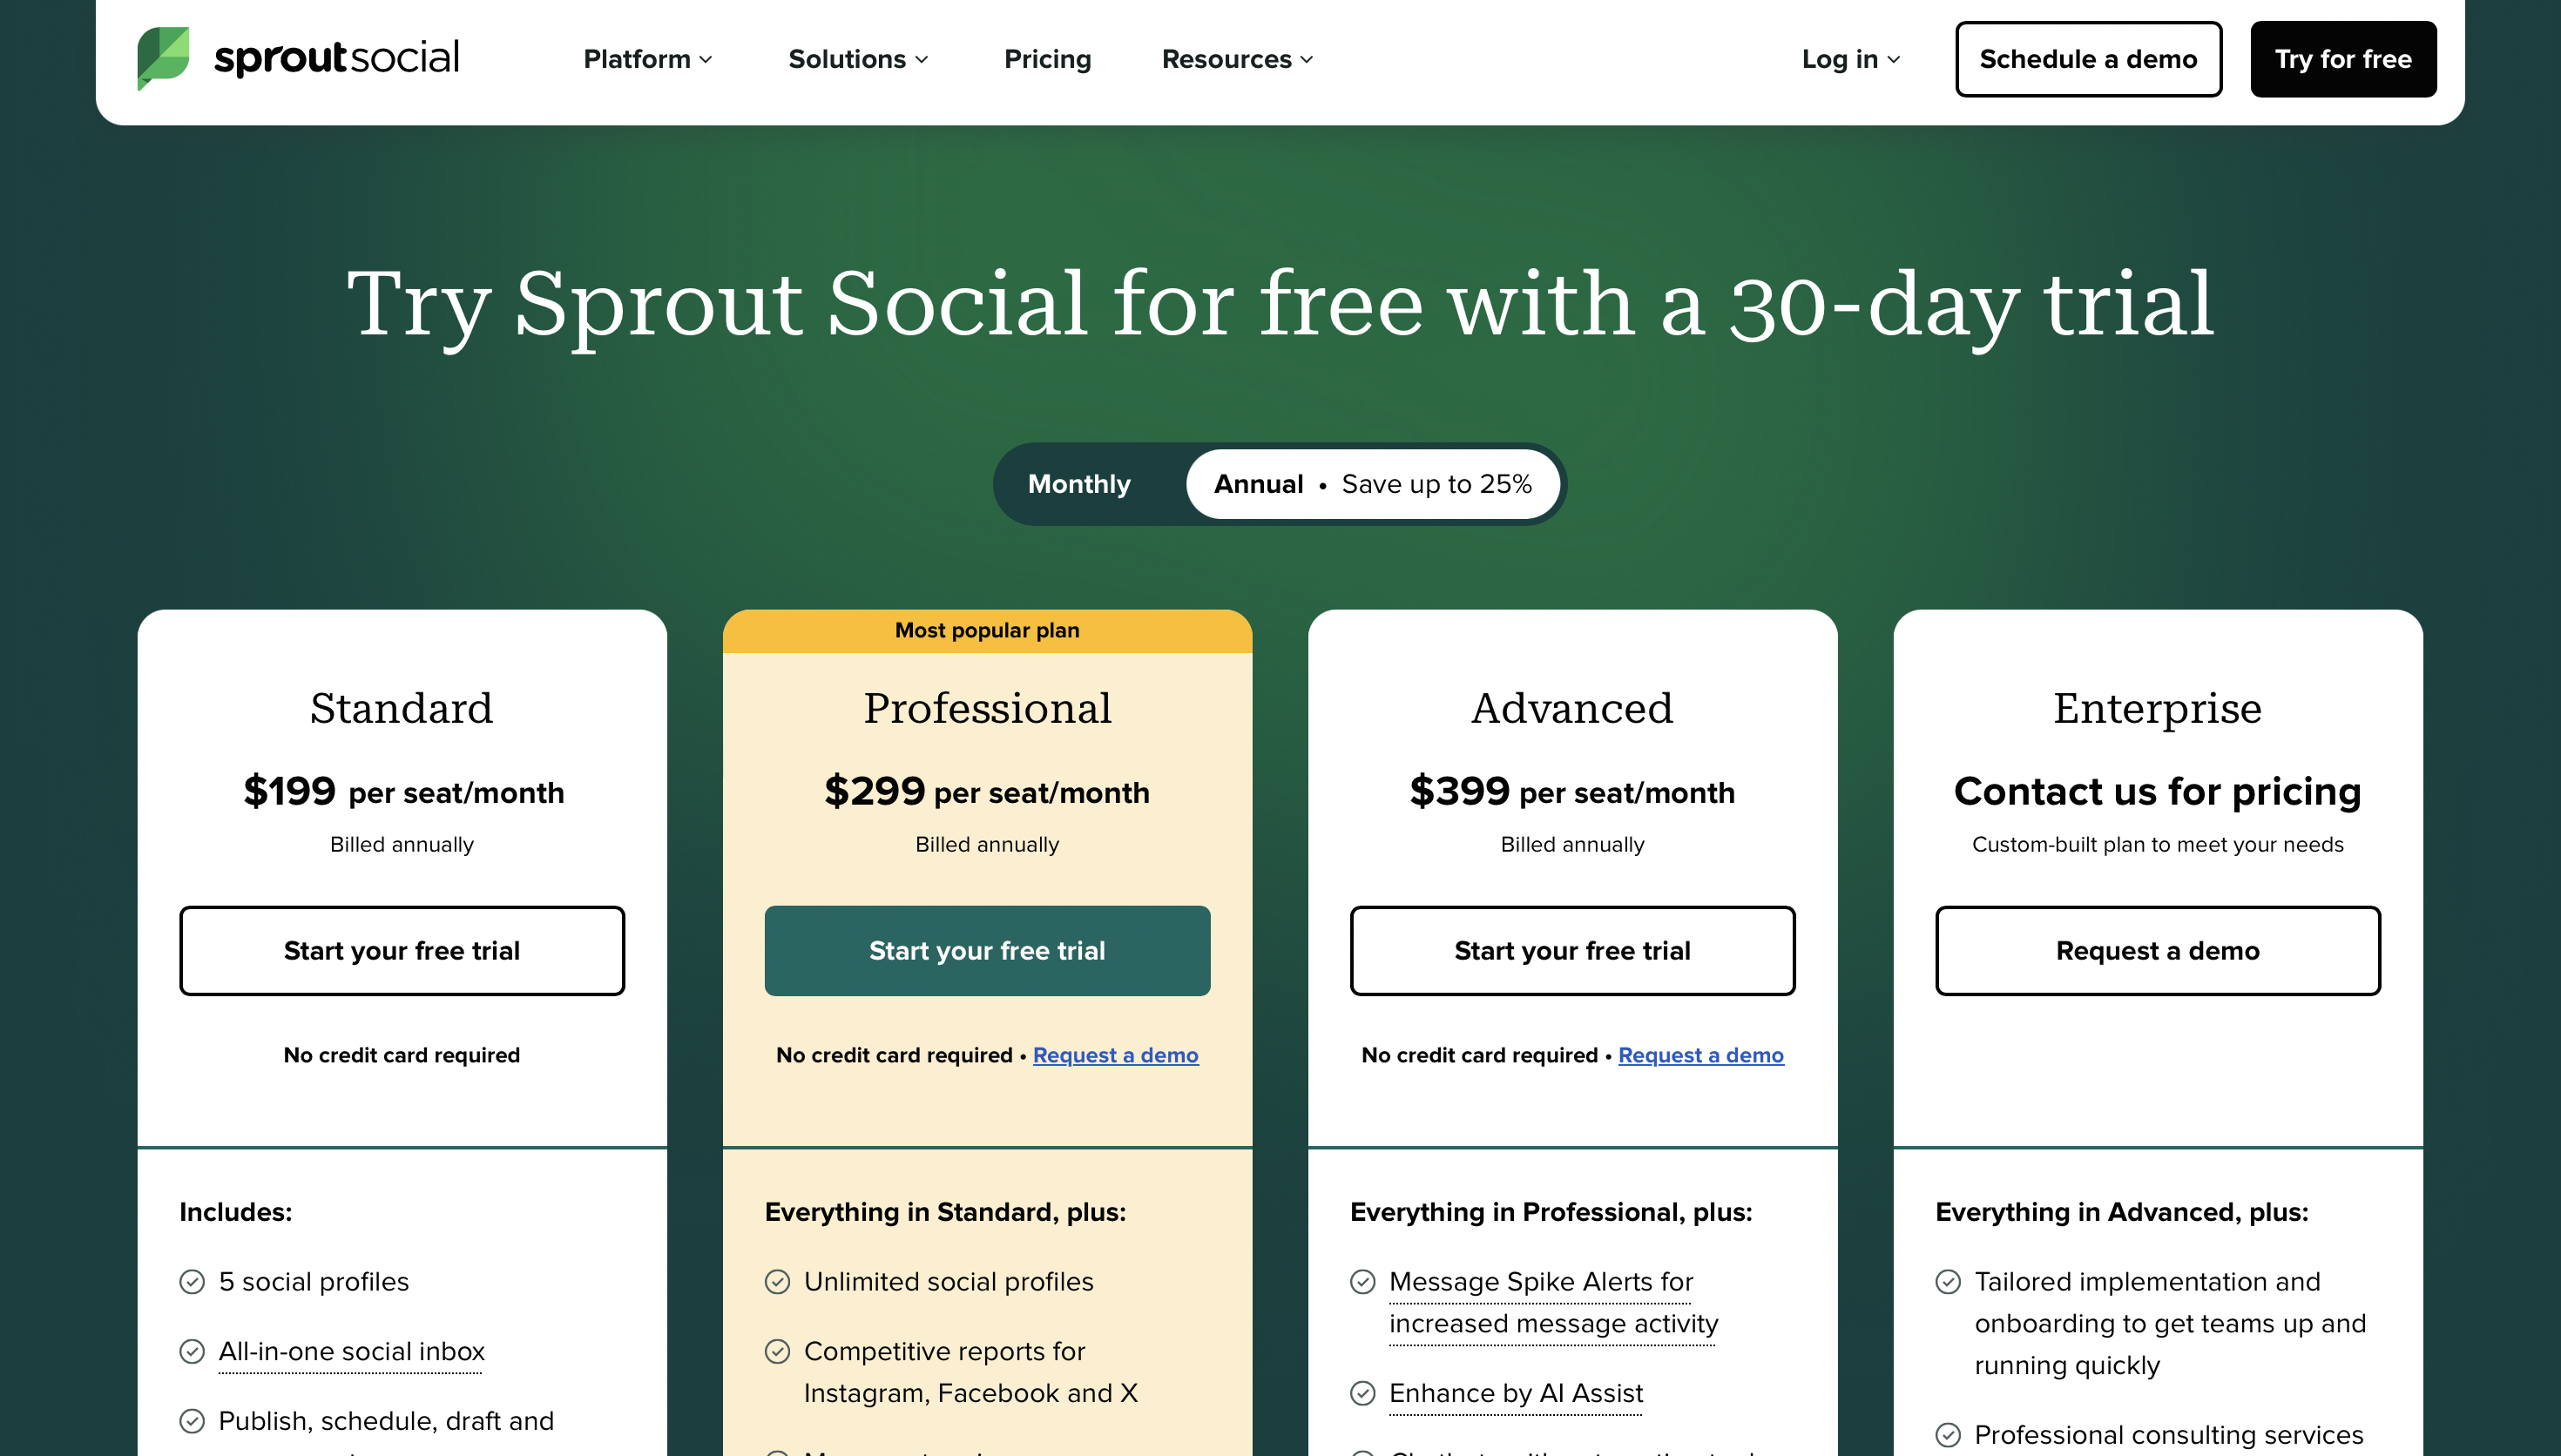 Sprout Social Pricing